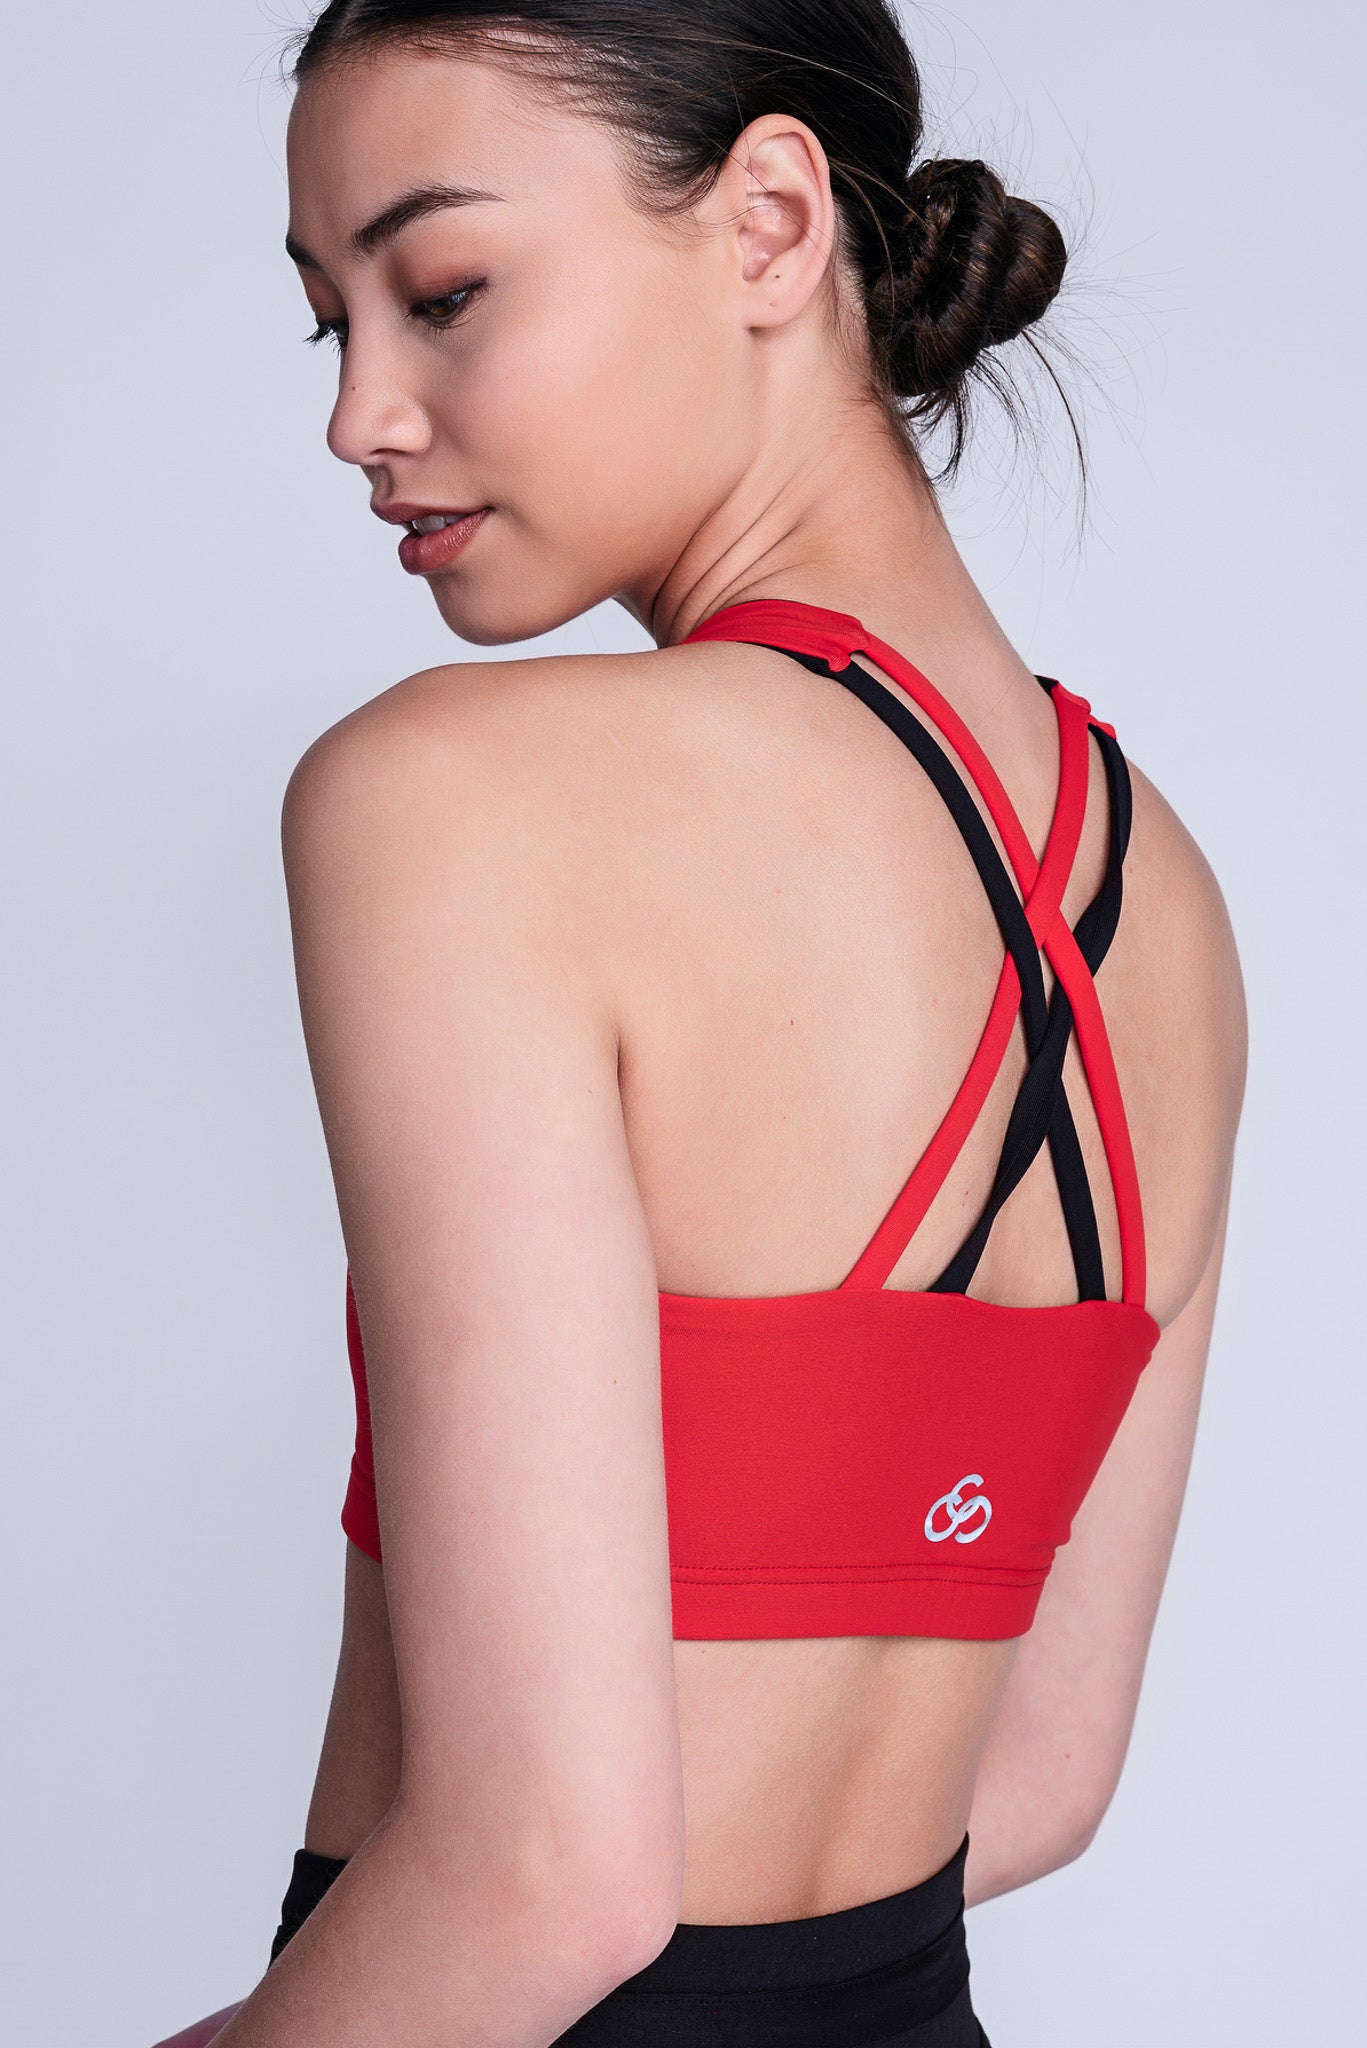 Women's Figure Skating Strappy Sports Bra in Red